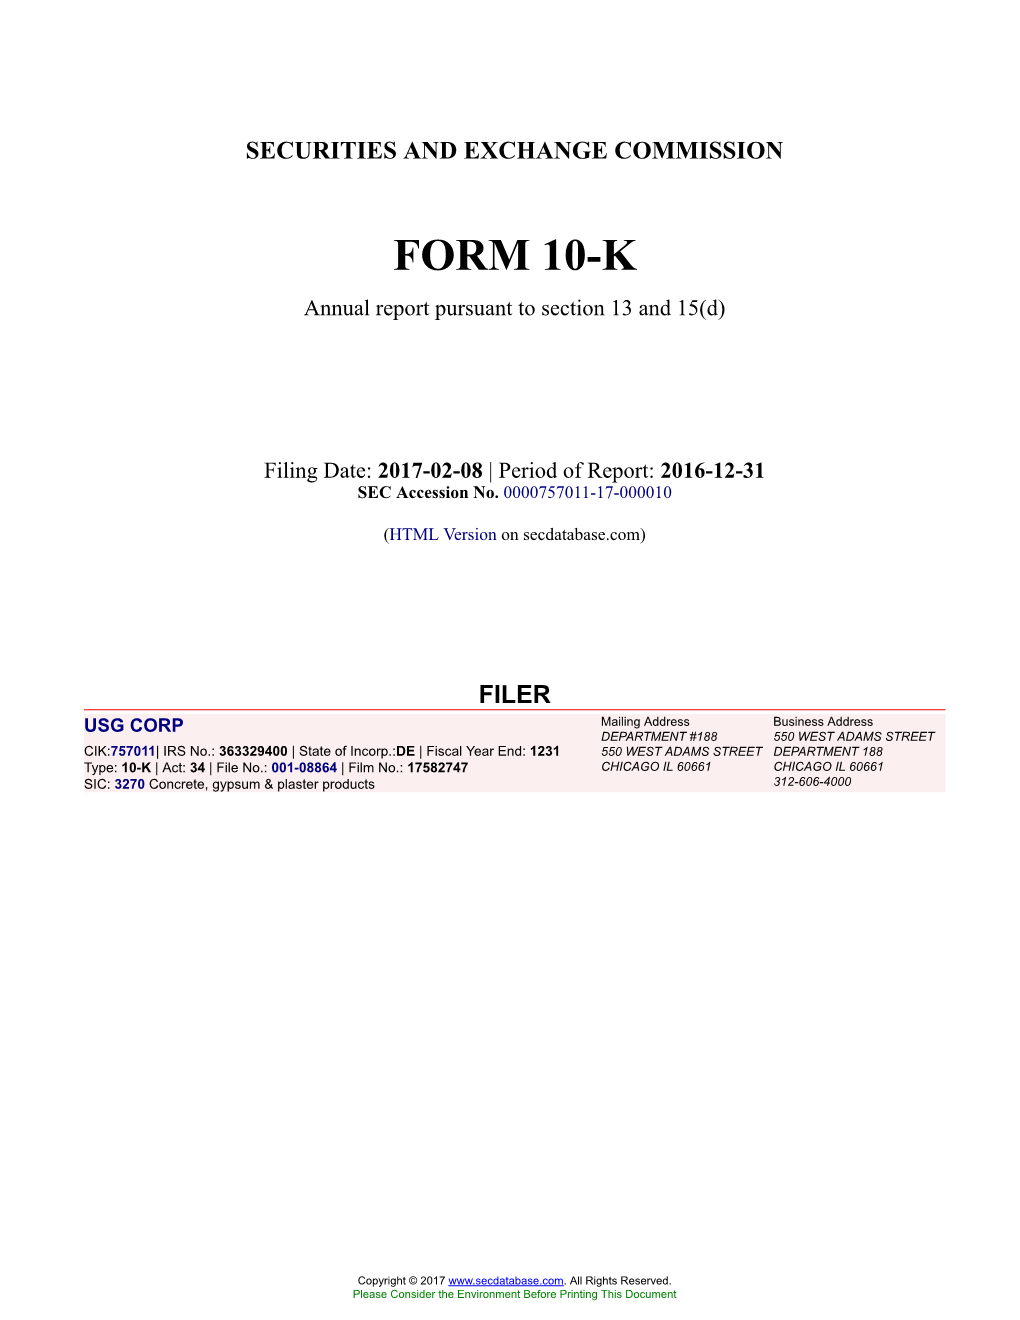 USG CORP Form 10-K Annual Report Filed 2017-02-08